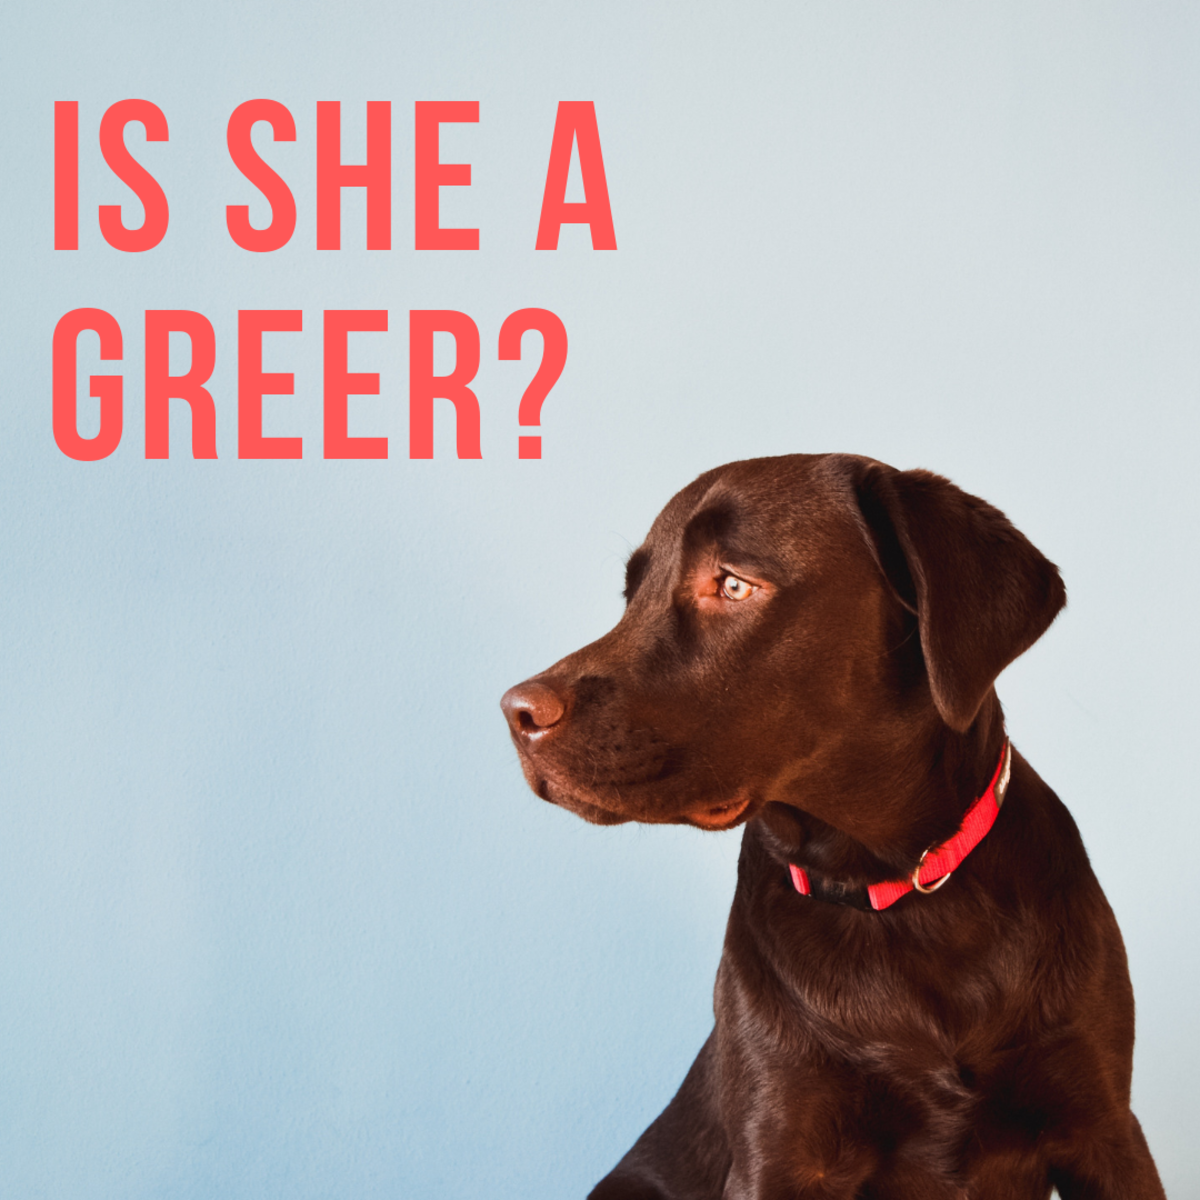 Is she a Greer?